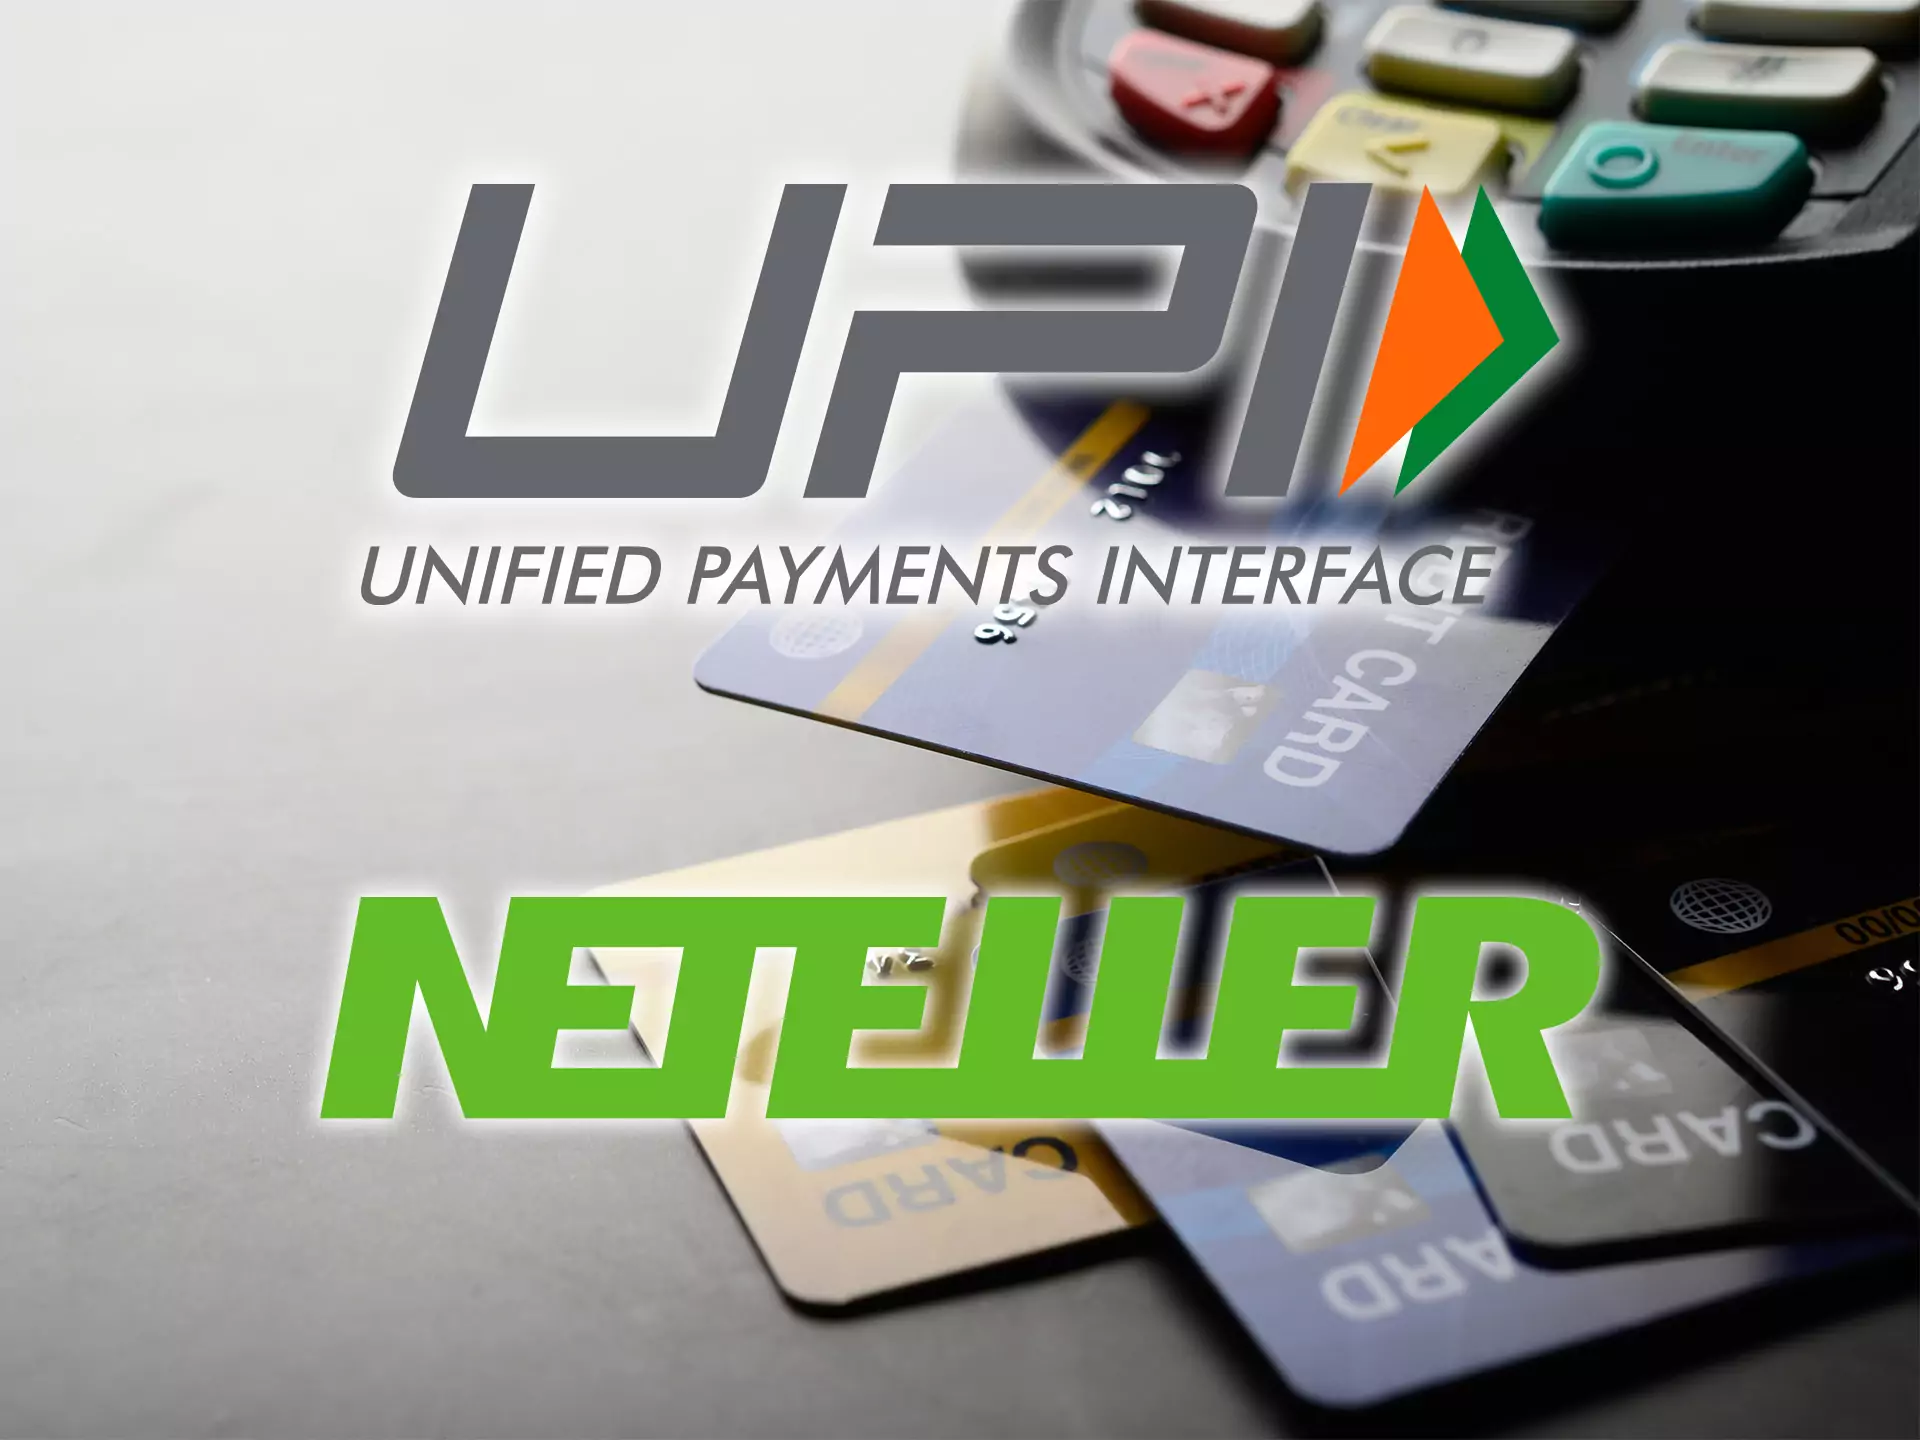 You can choose UPI, Neteller and other popular payment systems to deposit money in India.